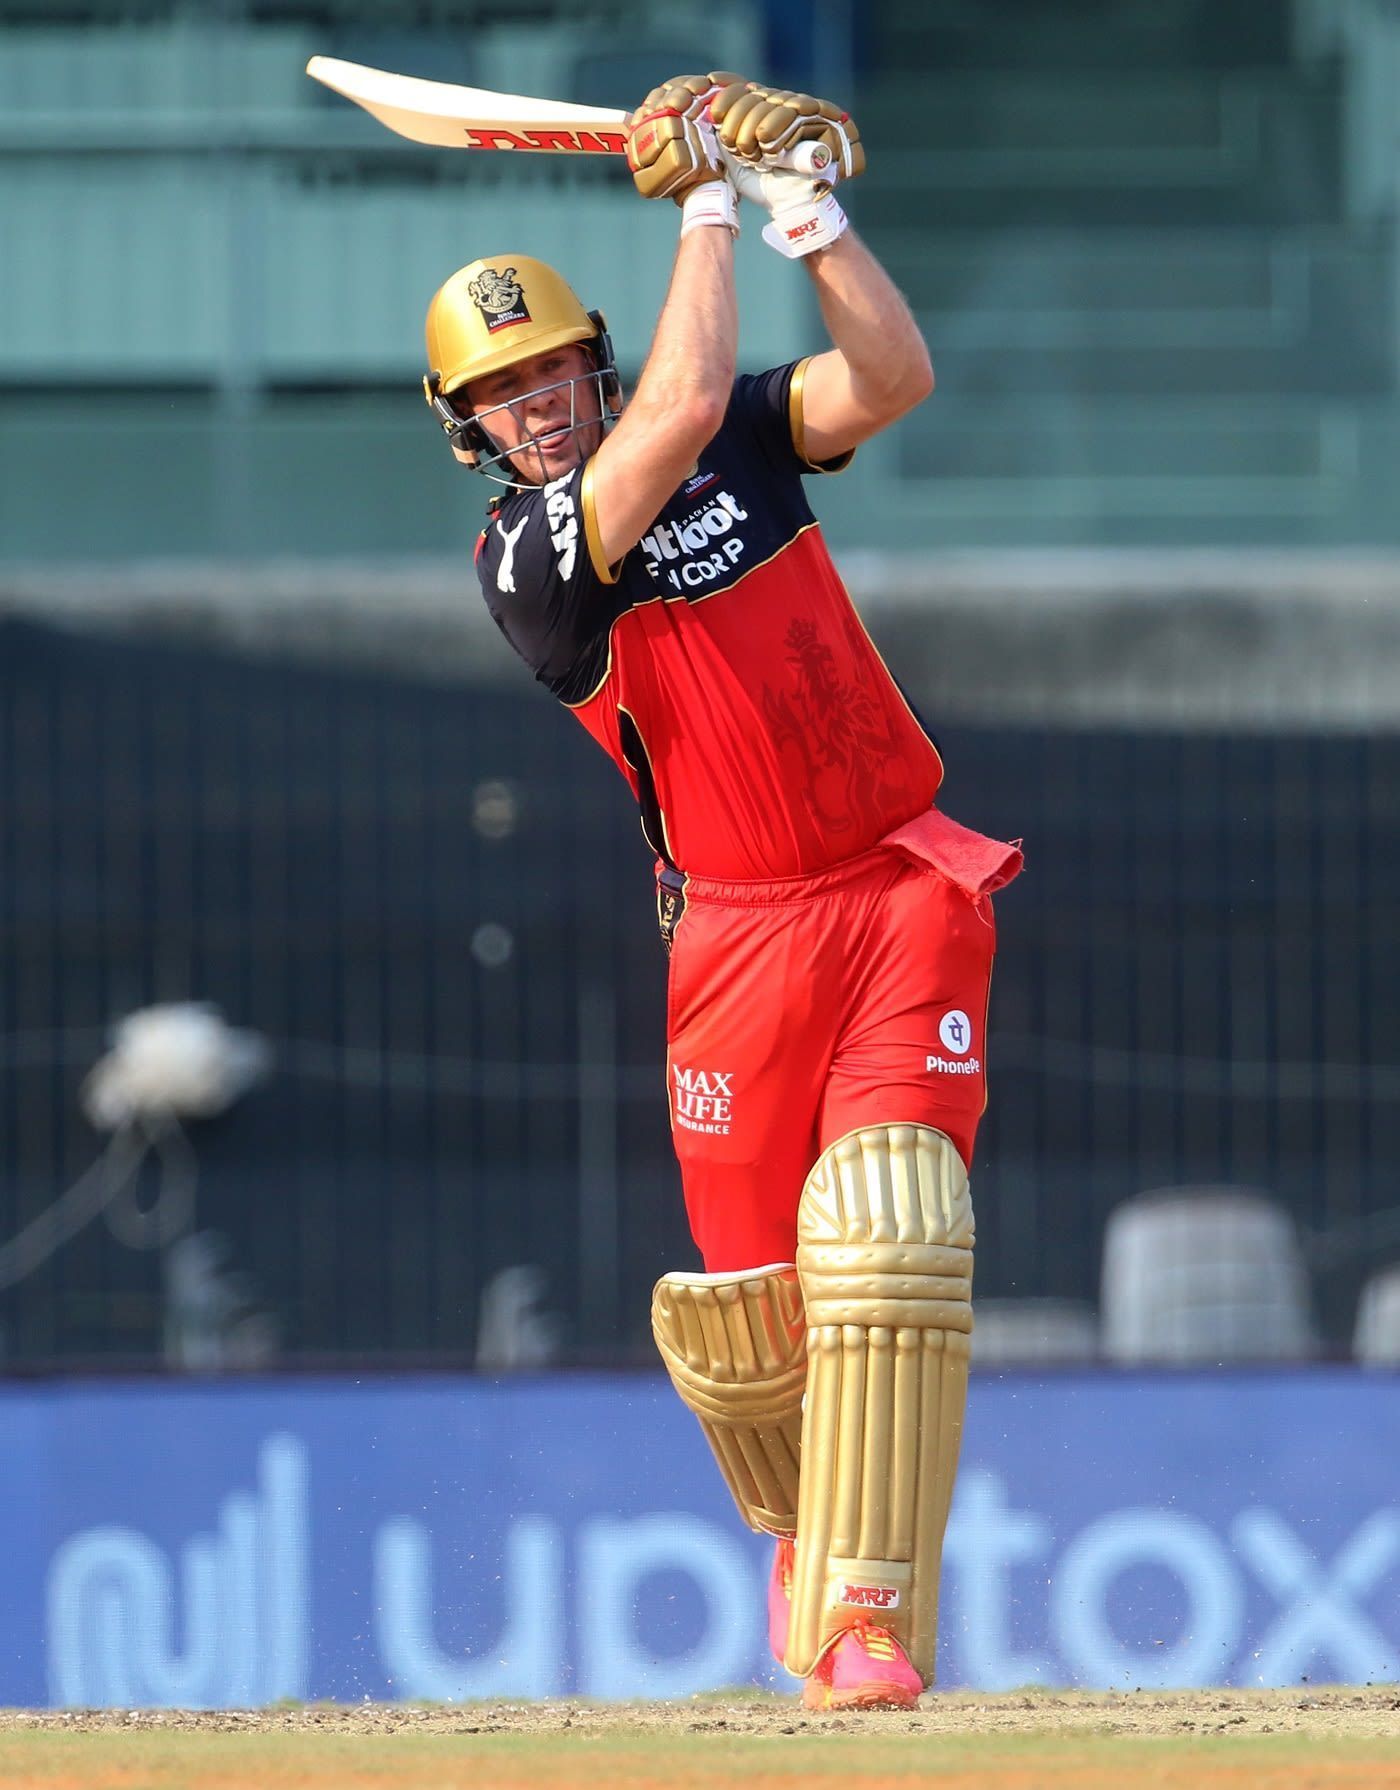 AB de Villiers in action during one of his superb innings for RCB